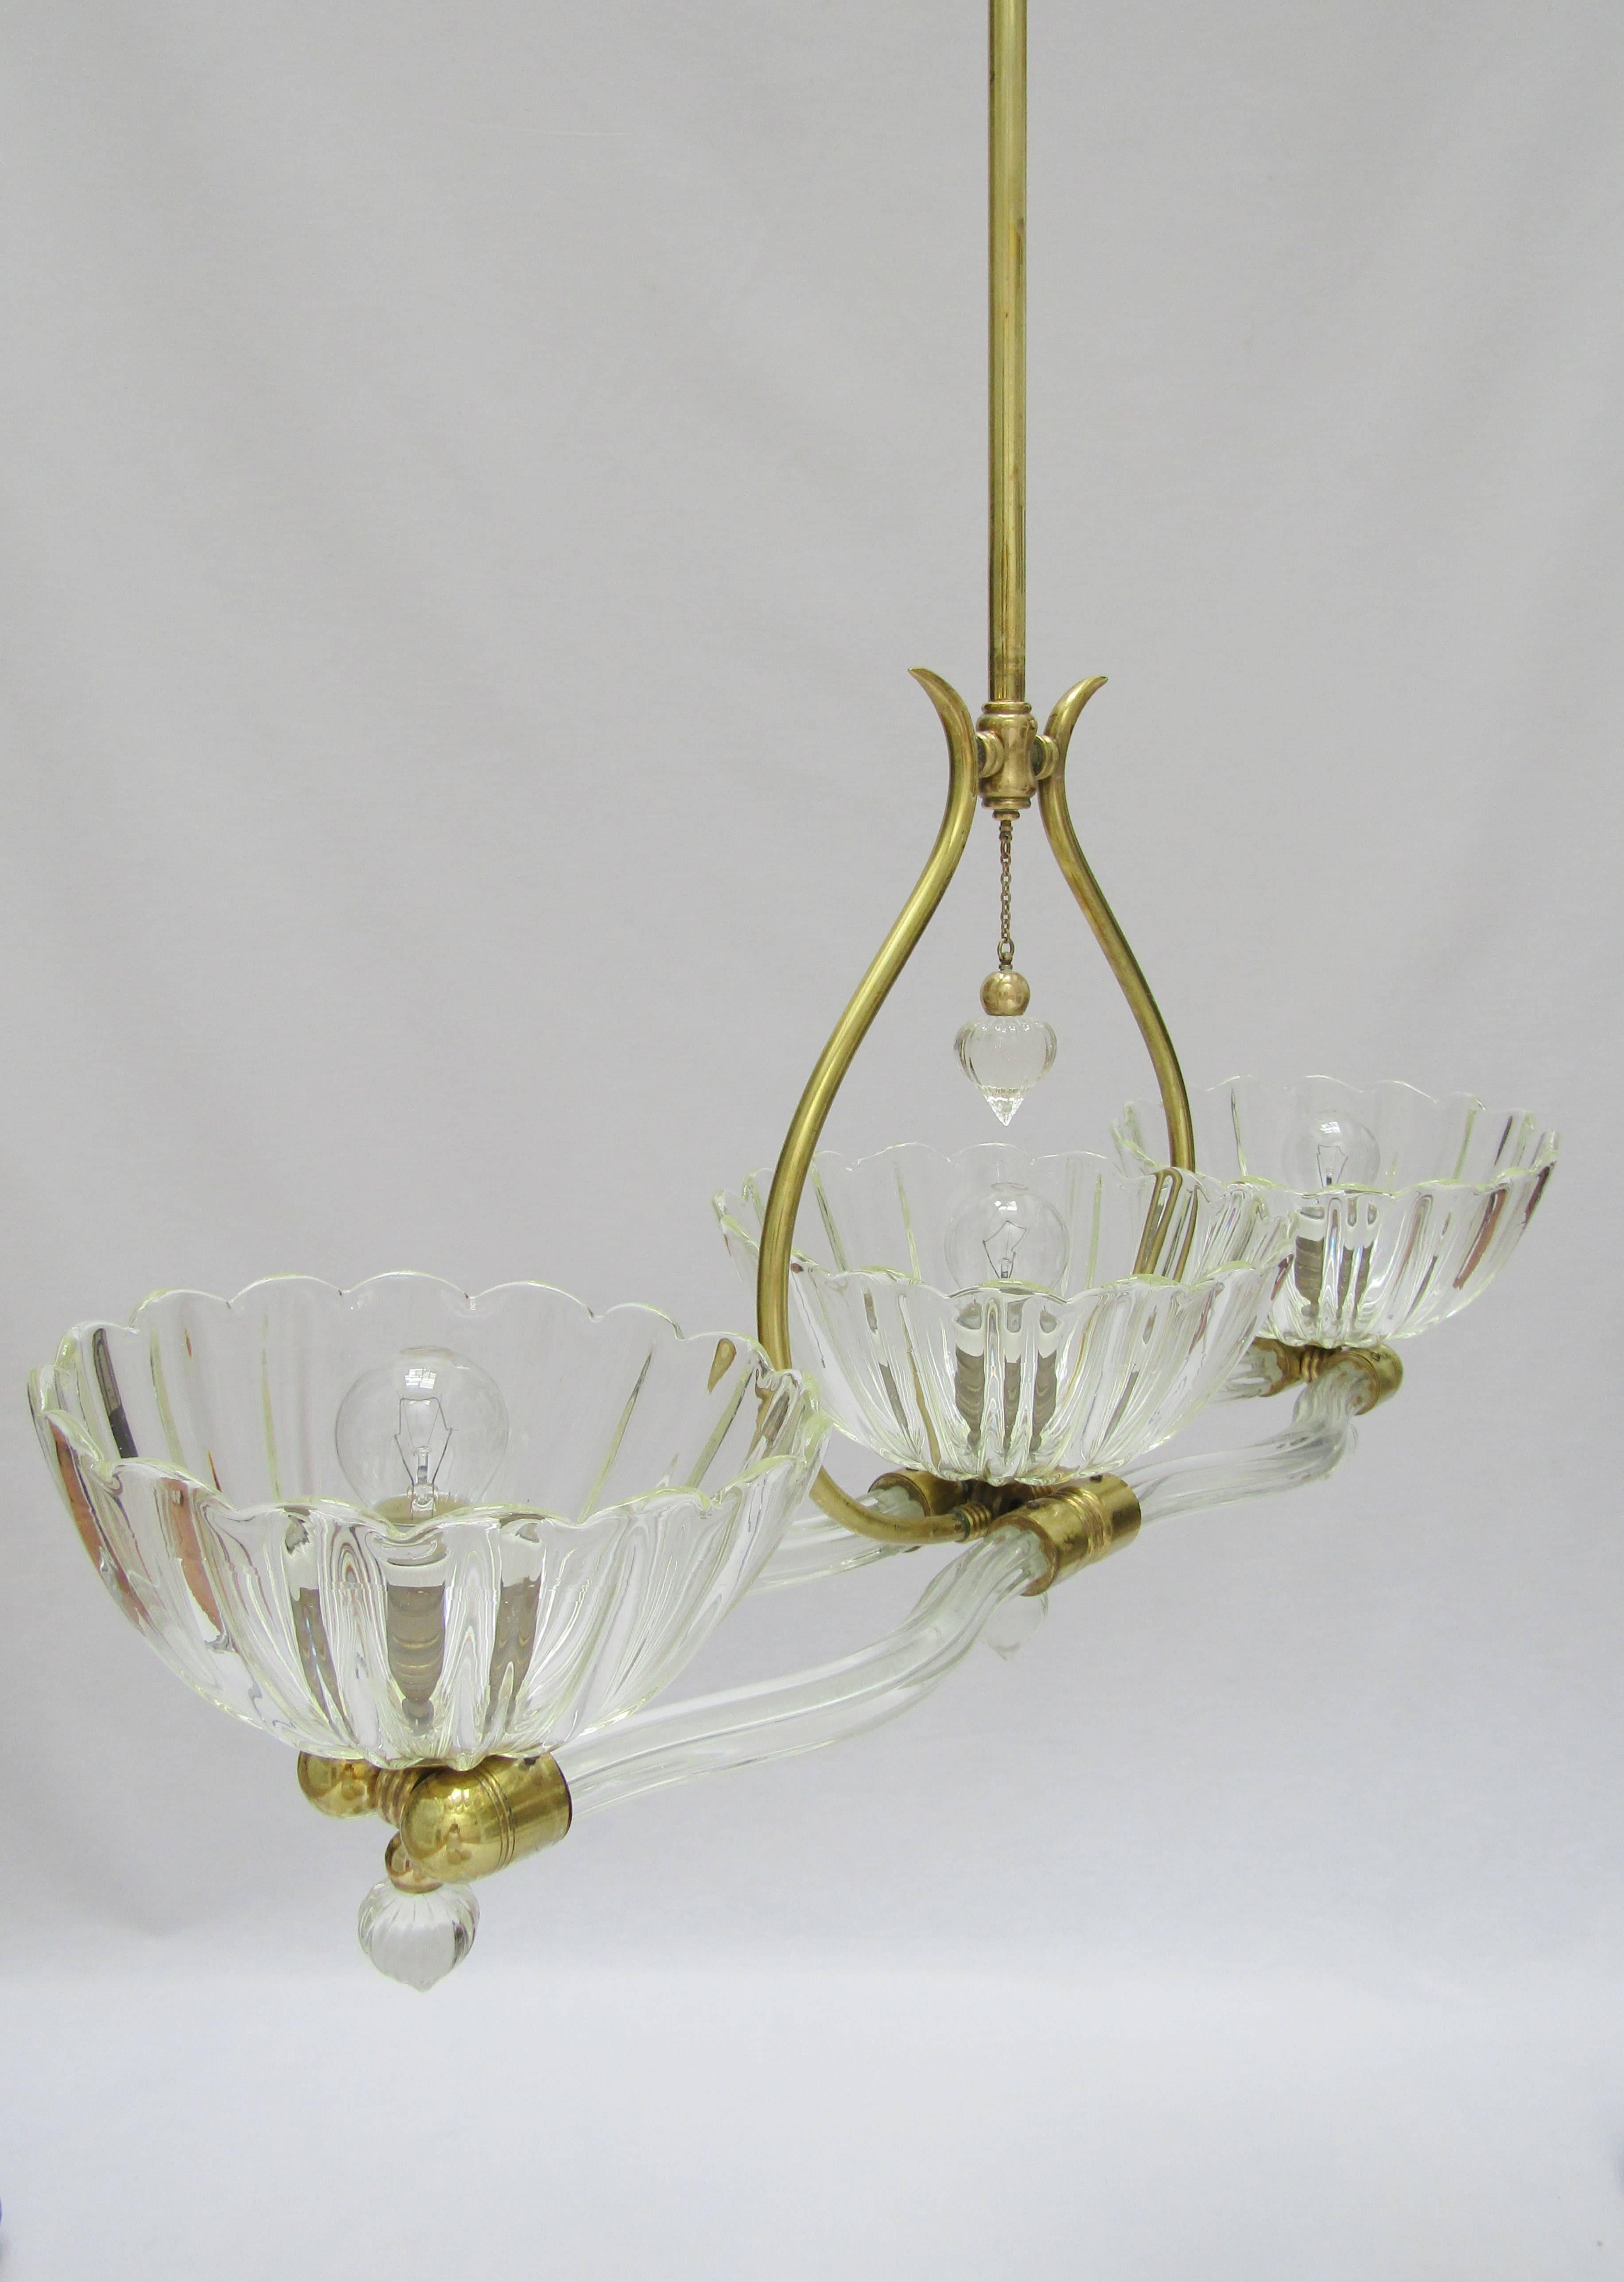 A three-light crystal and brass
chandelier by Barovier, Murano
Re-wired and PAT tested.